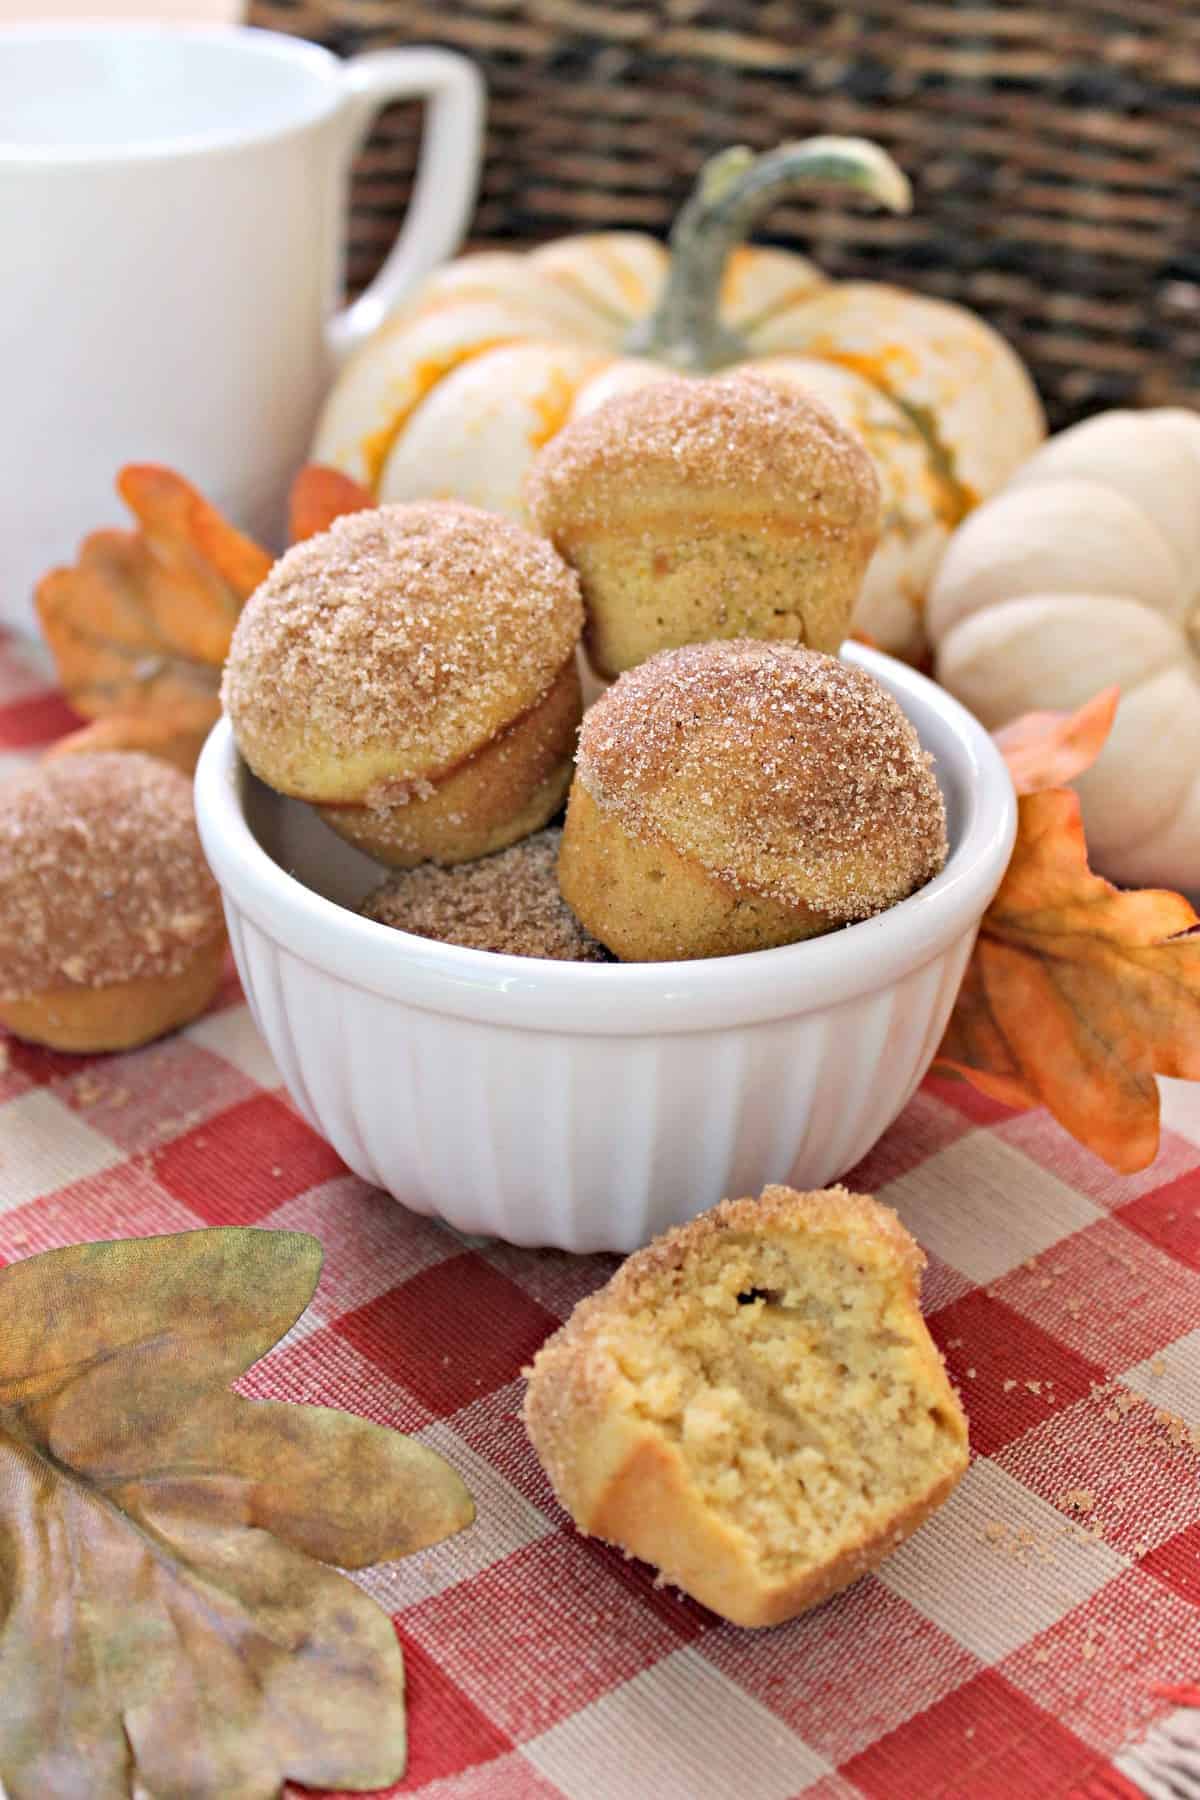 Mini Pumpkin Spice Donut Muffins! These petite pumpkin spice muffins imitate a breakfast favorite with a sugar and spice-encrusted dome. All of the flavors of fall rolled up into a tasty breakfast or brunch treat! 